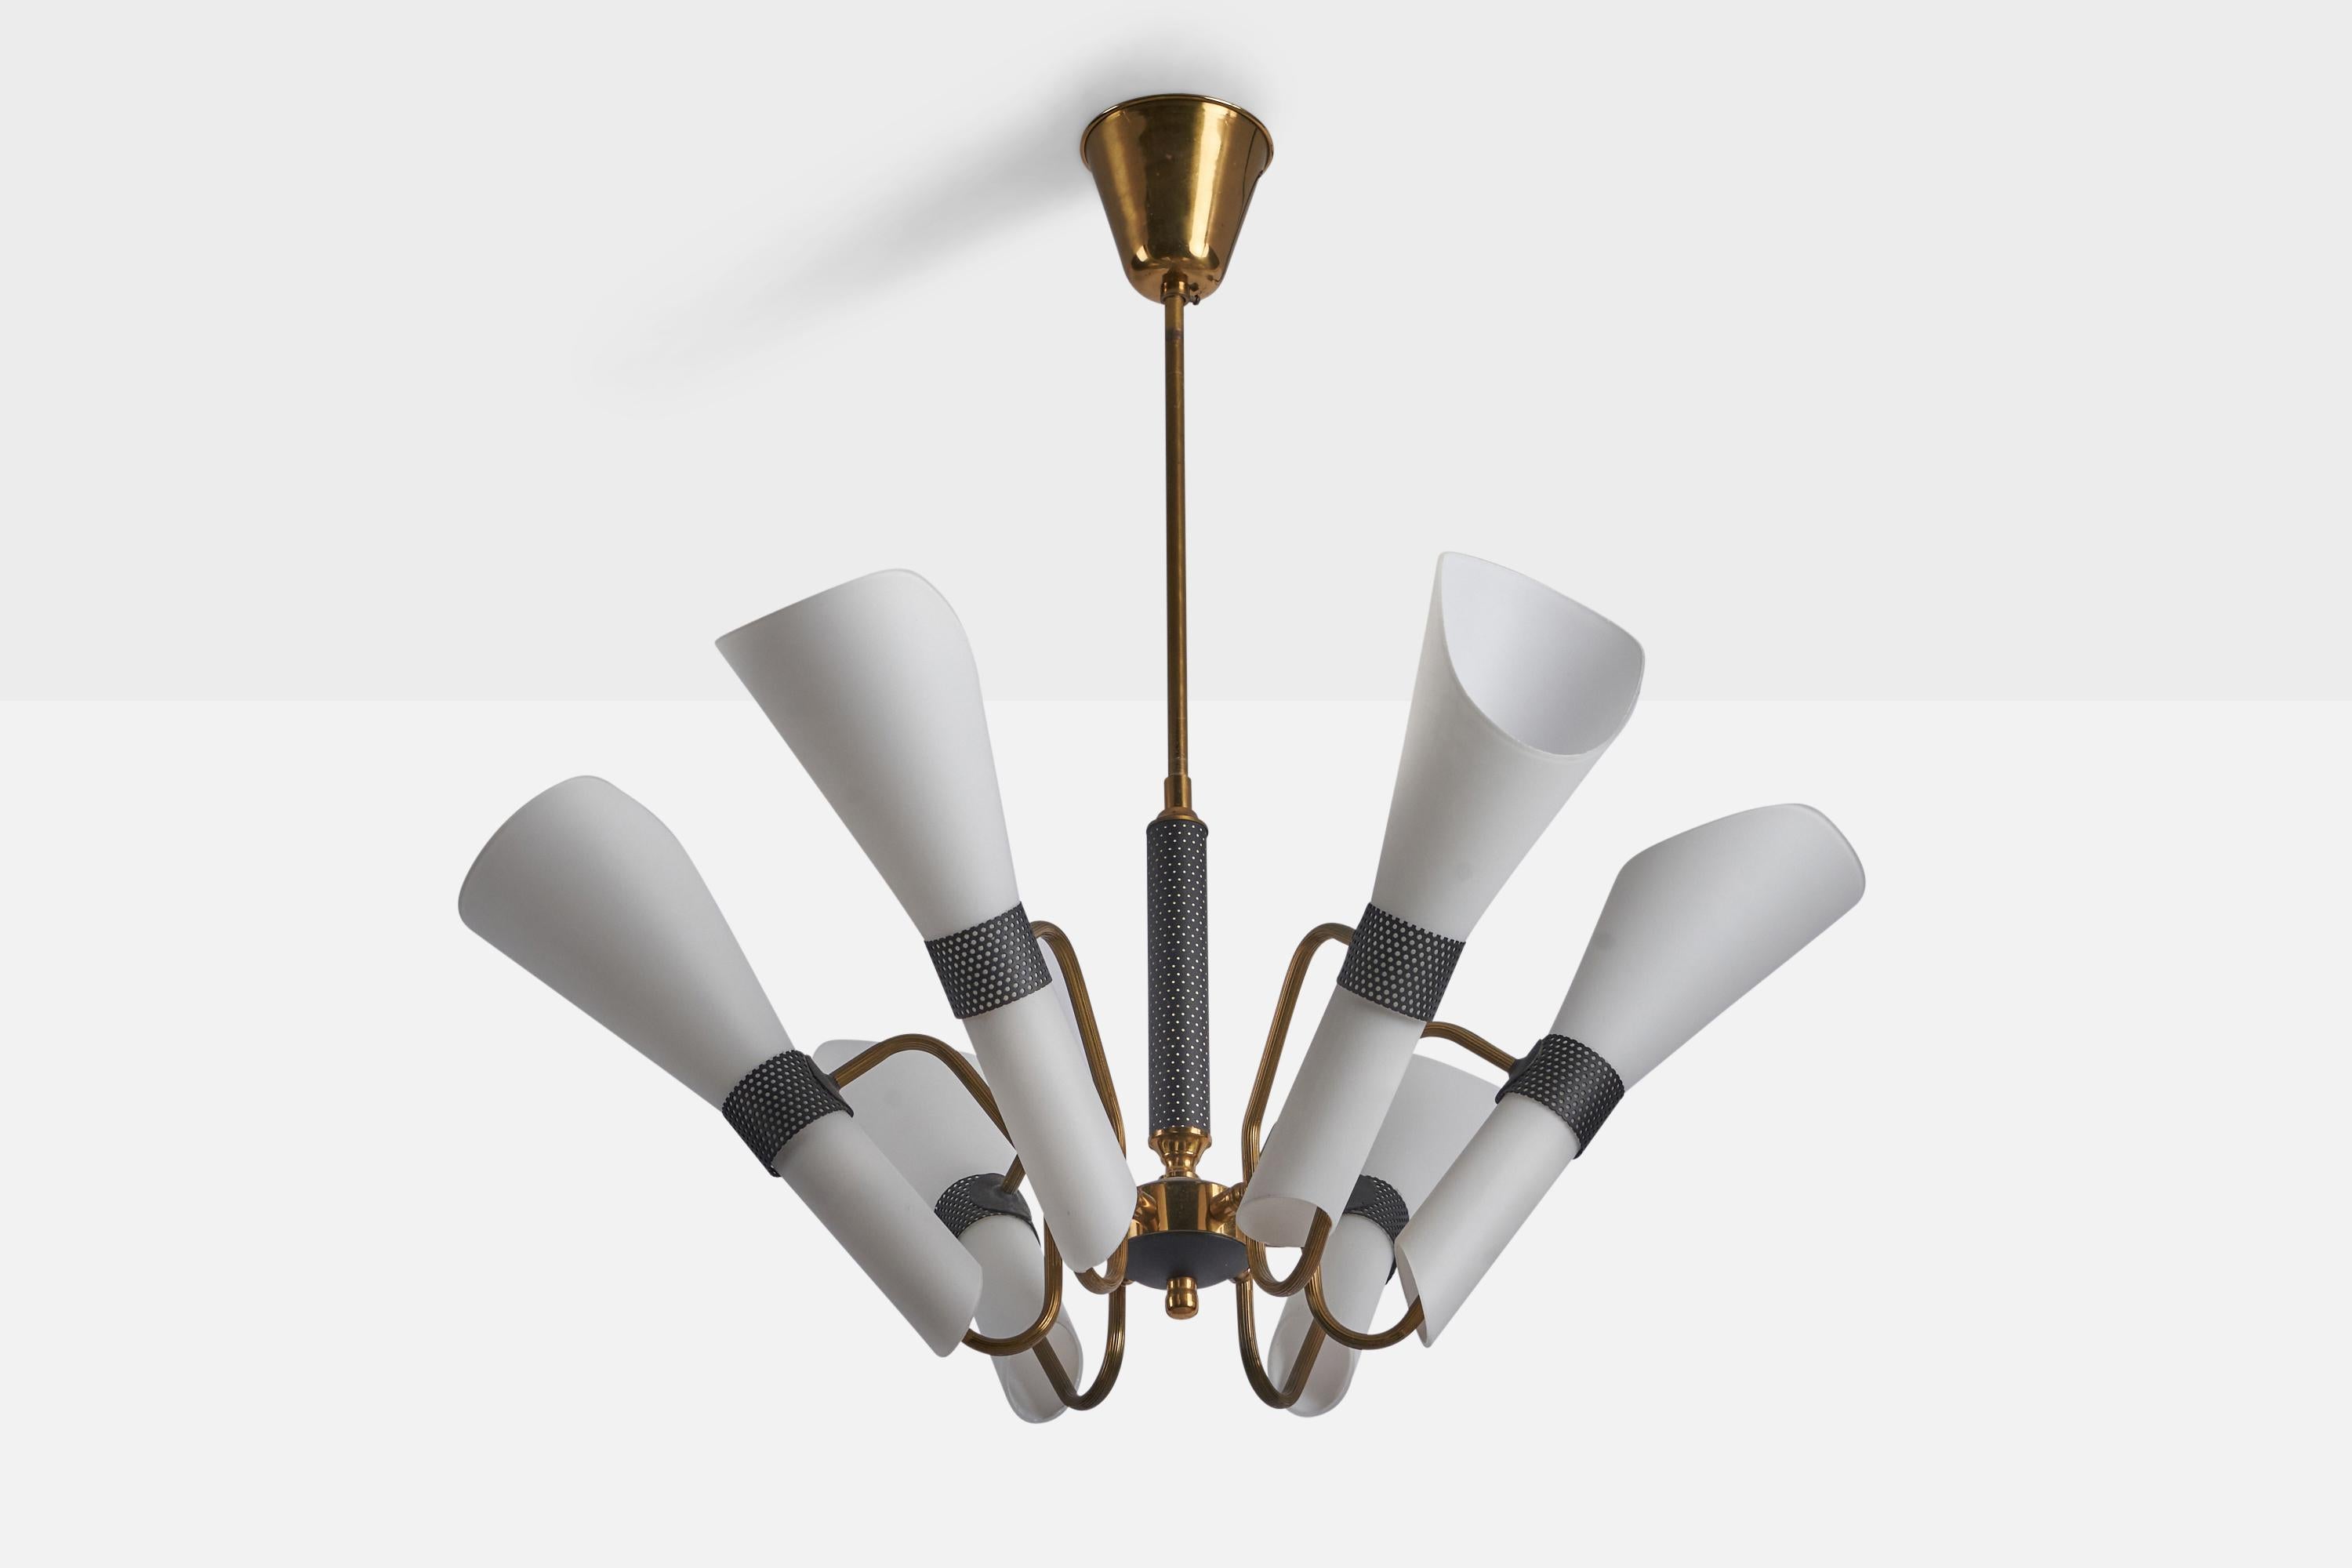 A brass, black-lacquered metal and opaline glass chandelier designed and produced in Sweden, c. 1950s.

Overall Dimensions (inches): 22” H x 25” Diameter
Bulb Specifications: E-14 Bulb
Number of Sockets: 6